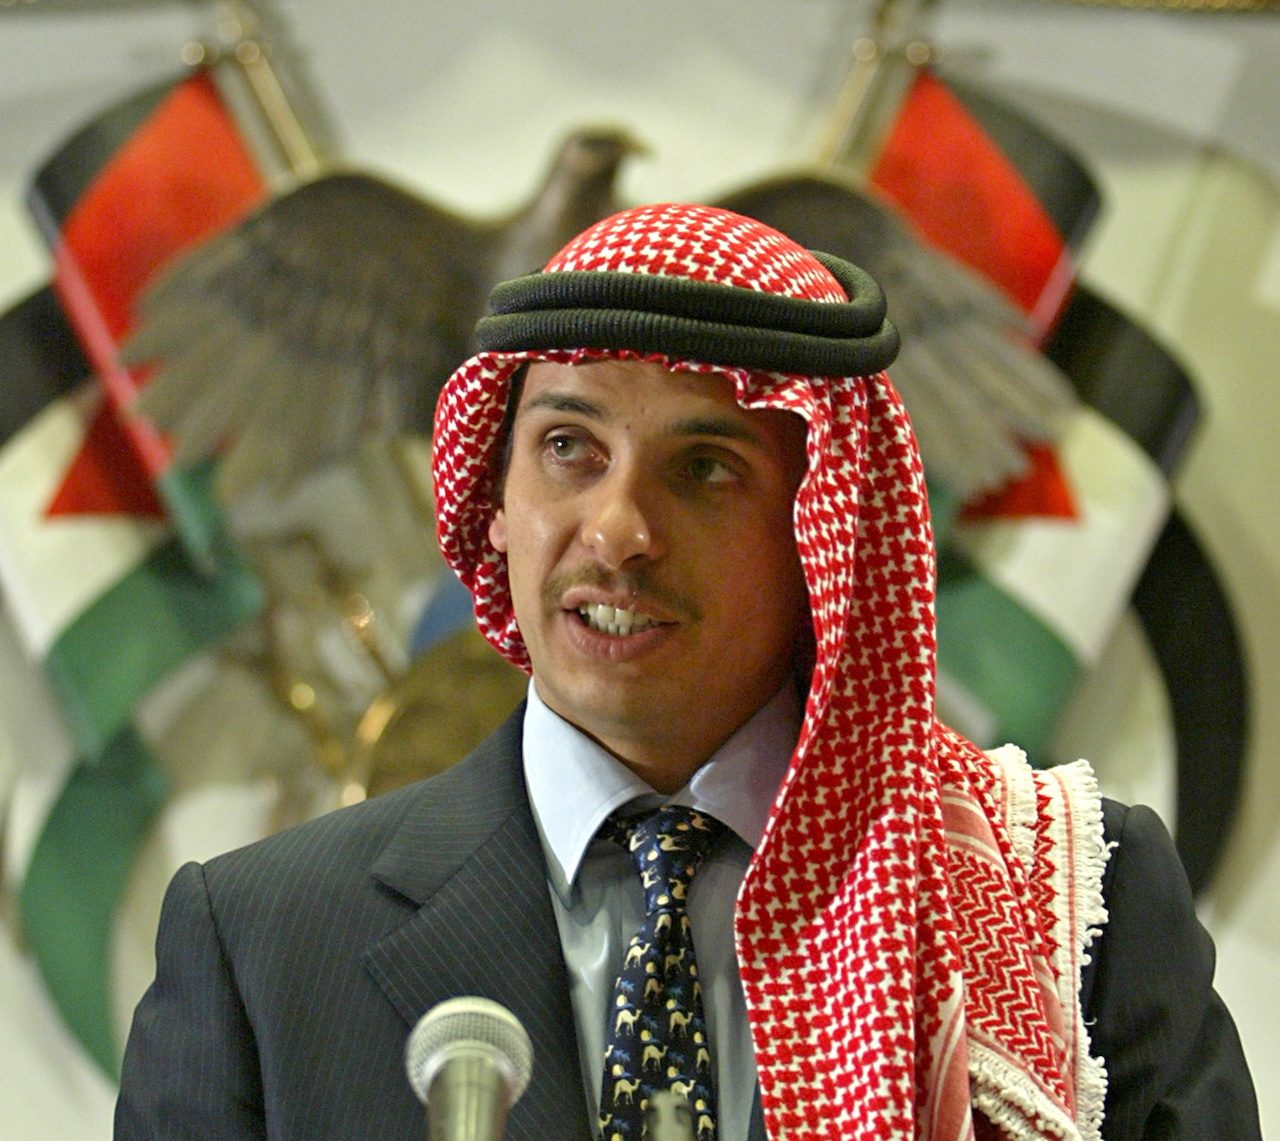 Jordanian military warns king’s half-brother to stop actions ‘undermining stability’